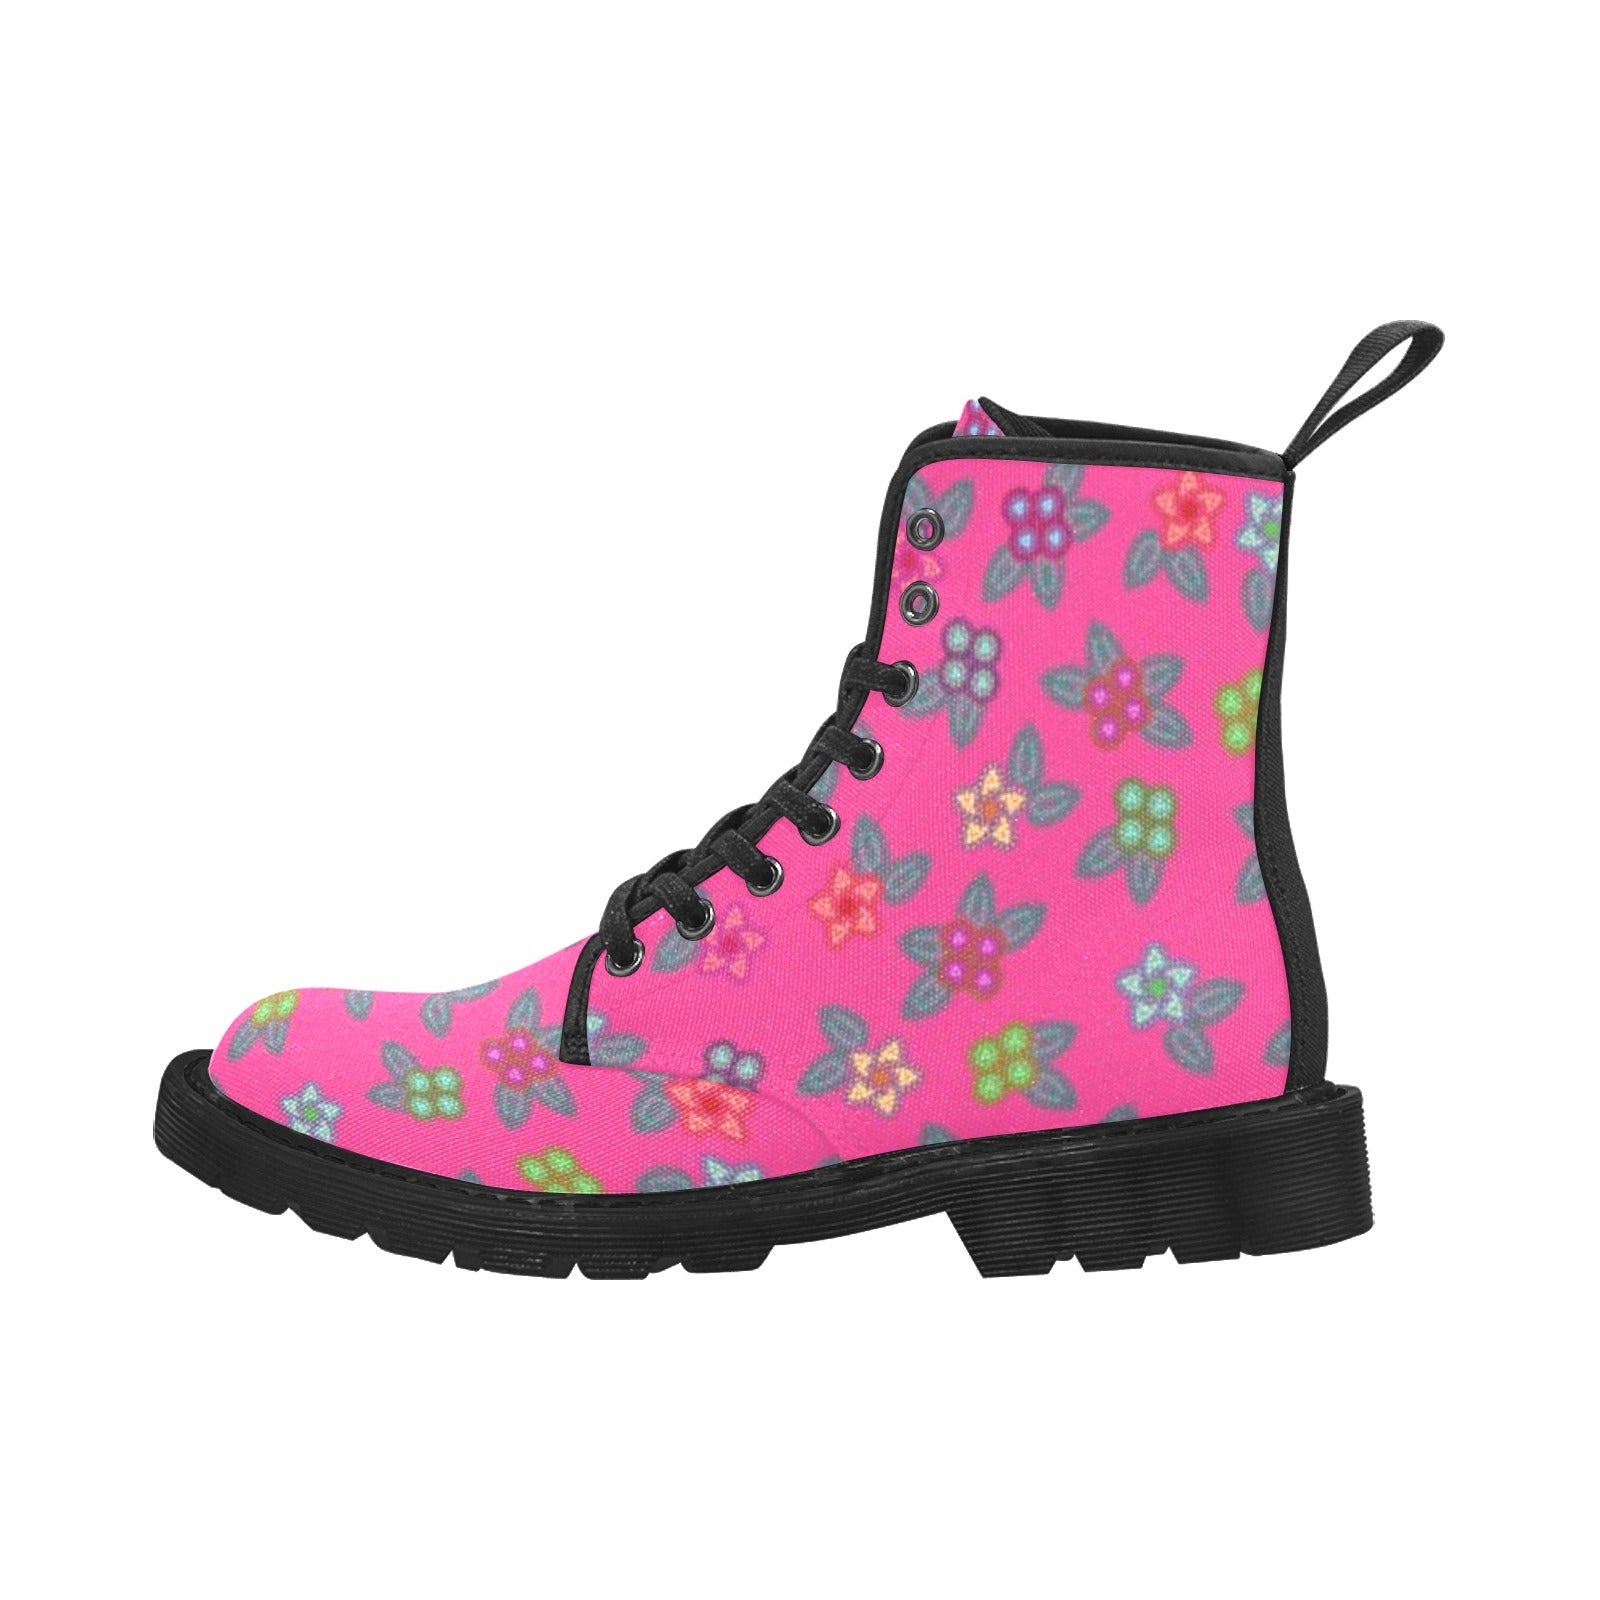 Berry Flowers Boots for Men (Black)